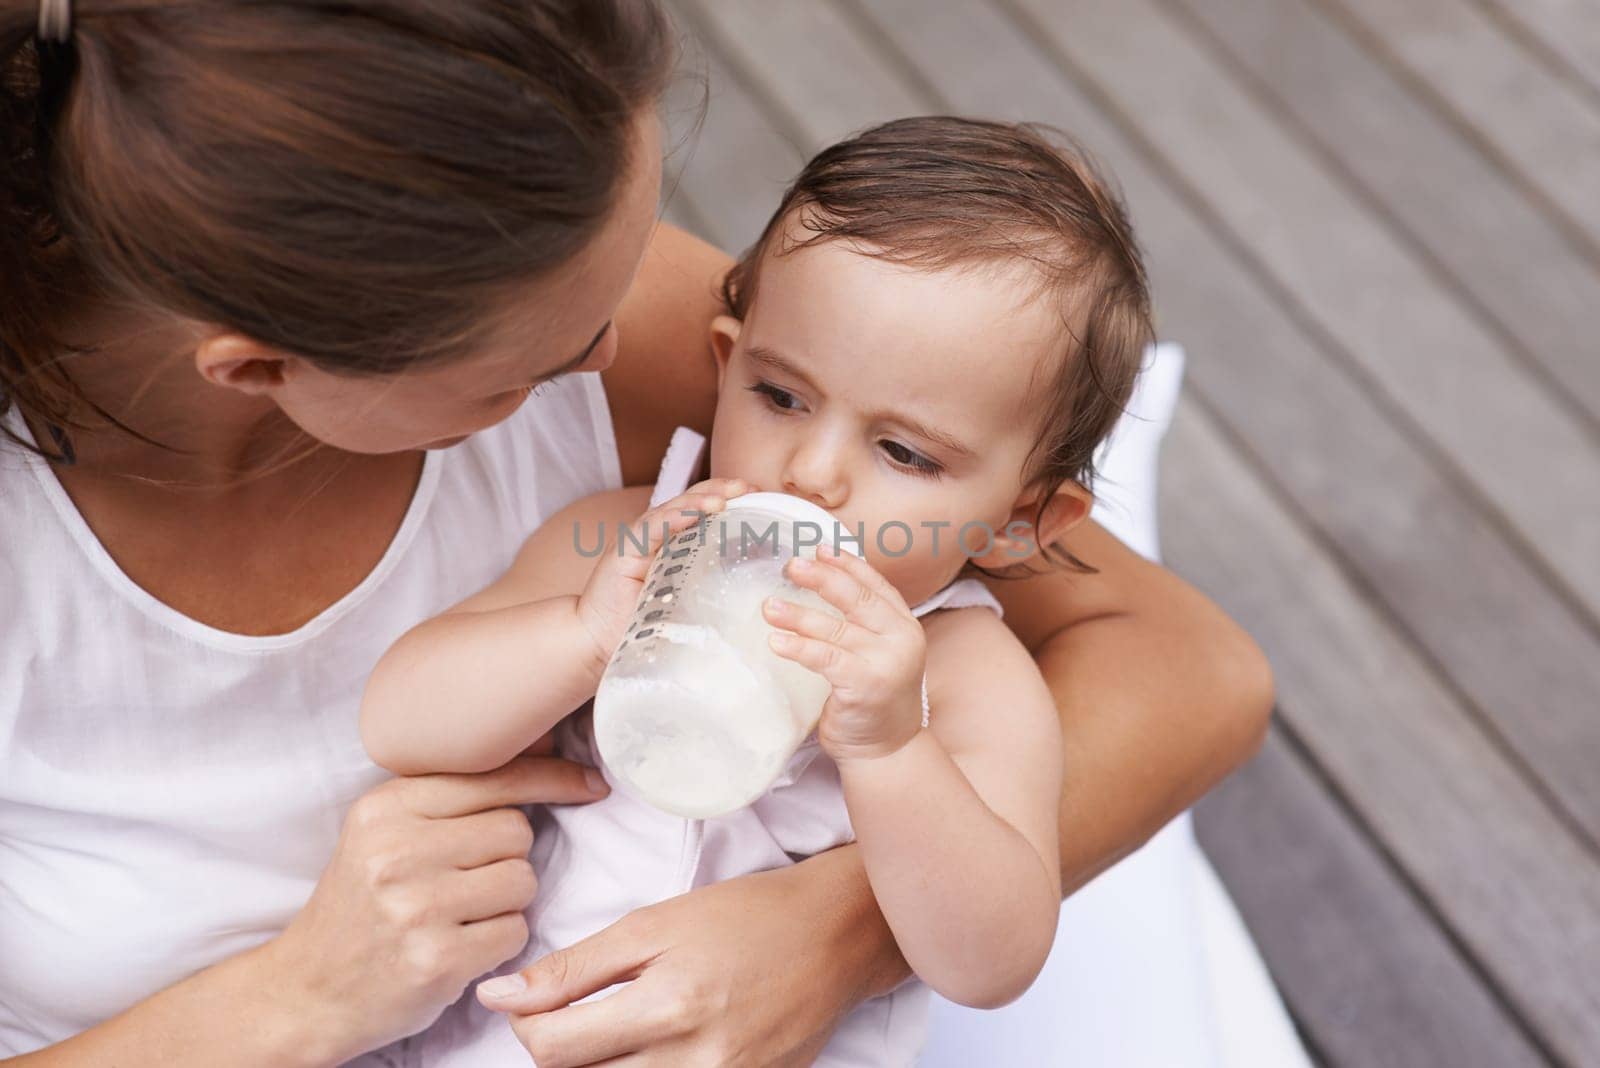 Baby, mother and drinking formula for nutrition, food and relaxing together on porch at home. Mommy, toddler and bottle for health or child development in outdoors, feeding and milk for wellness.